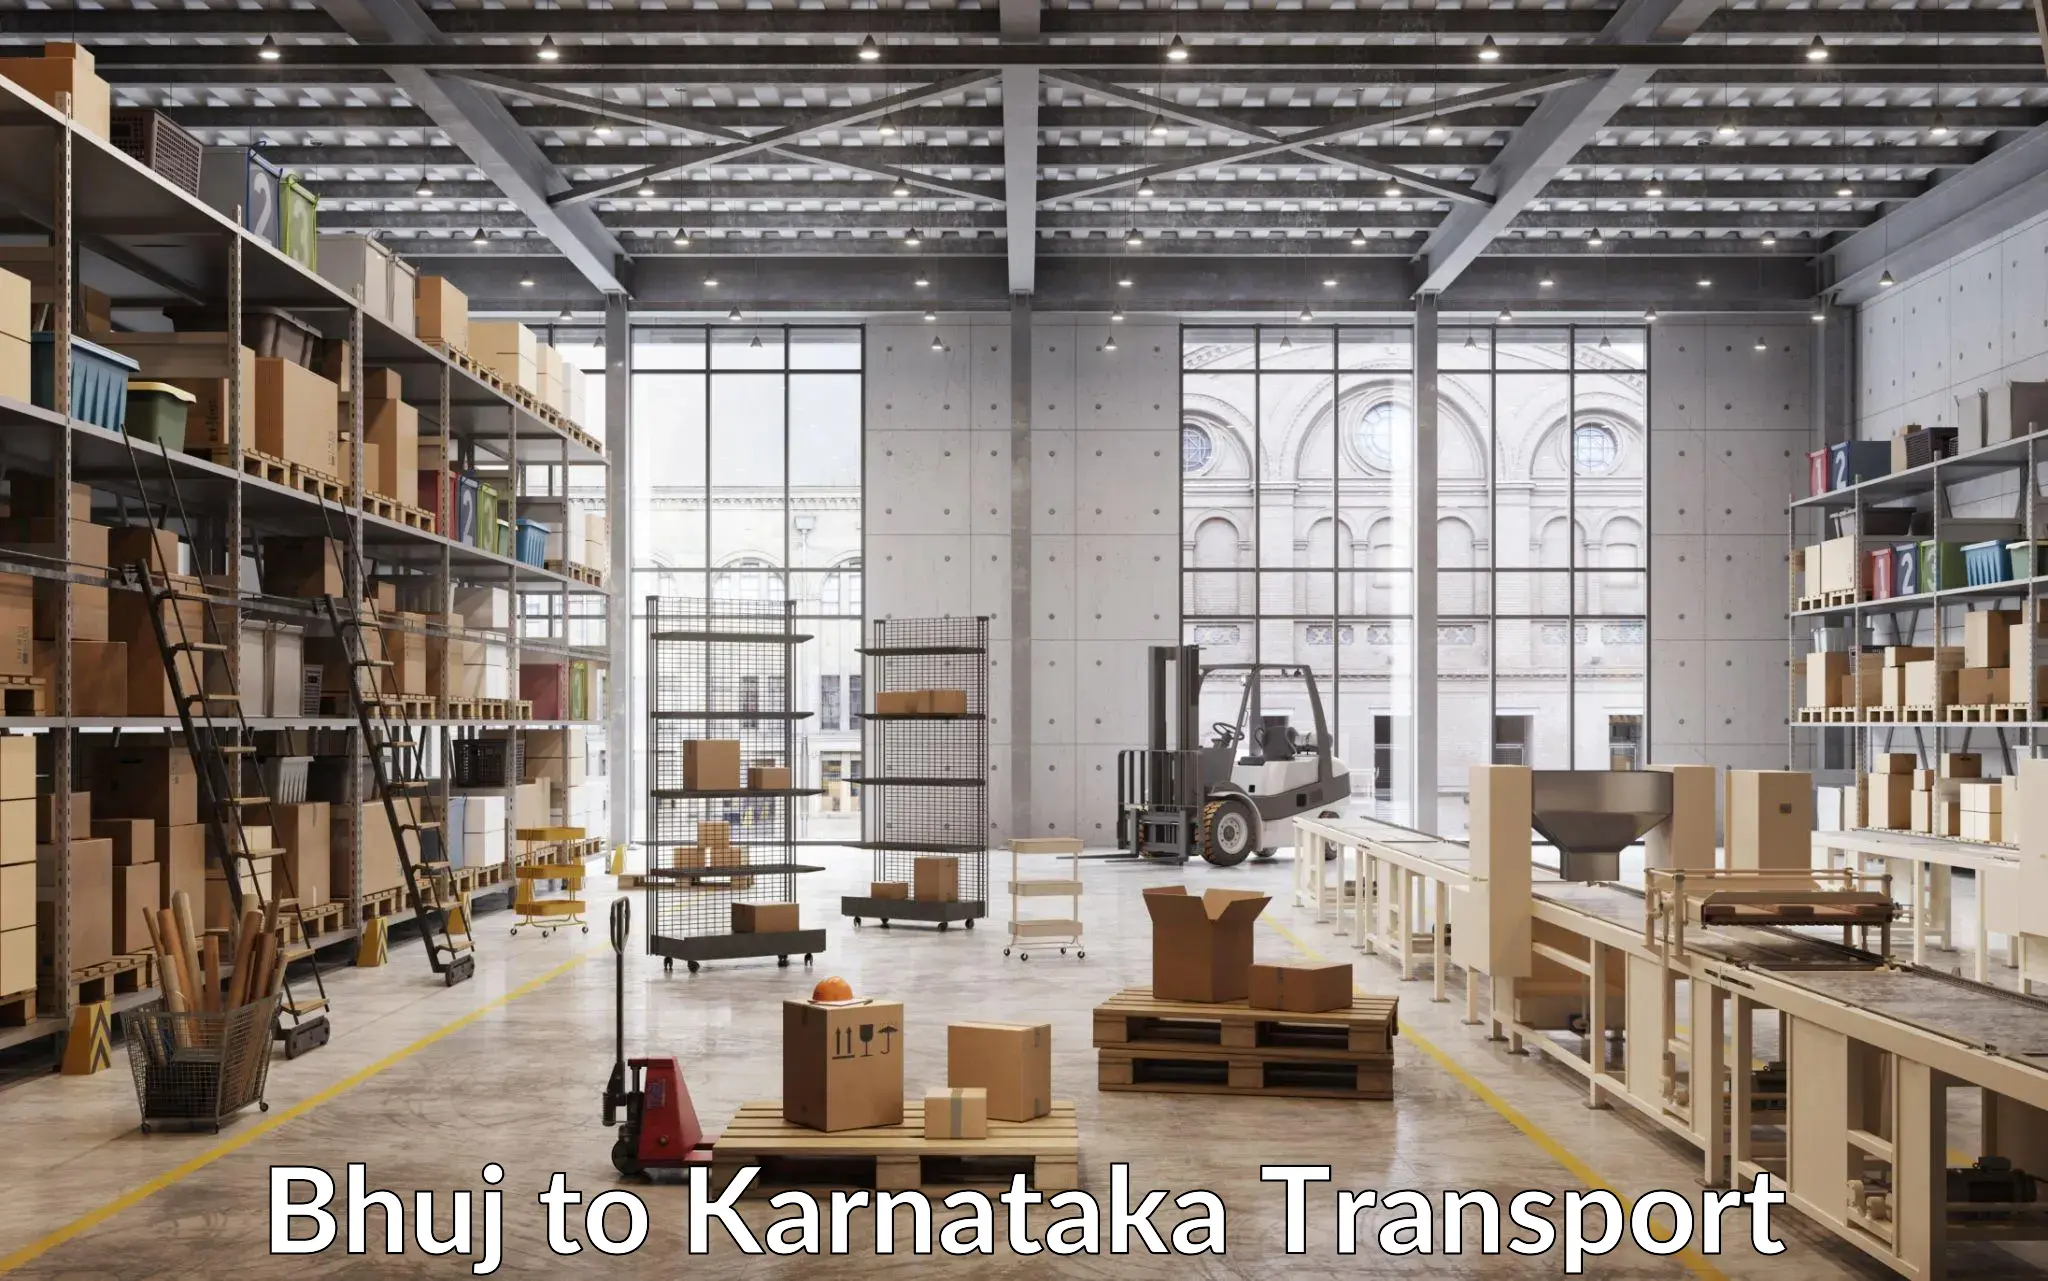 Truck transport companies in India Bhuj to Challakere